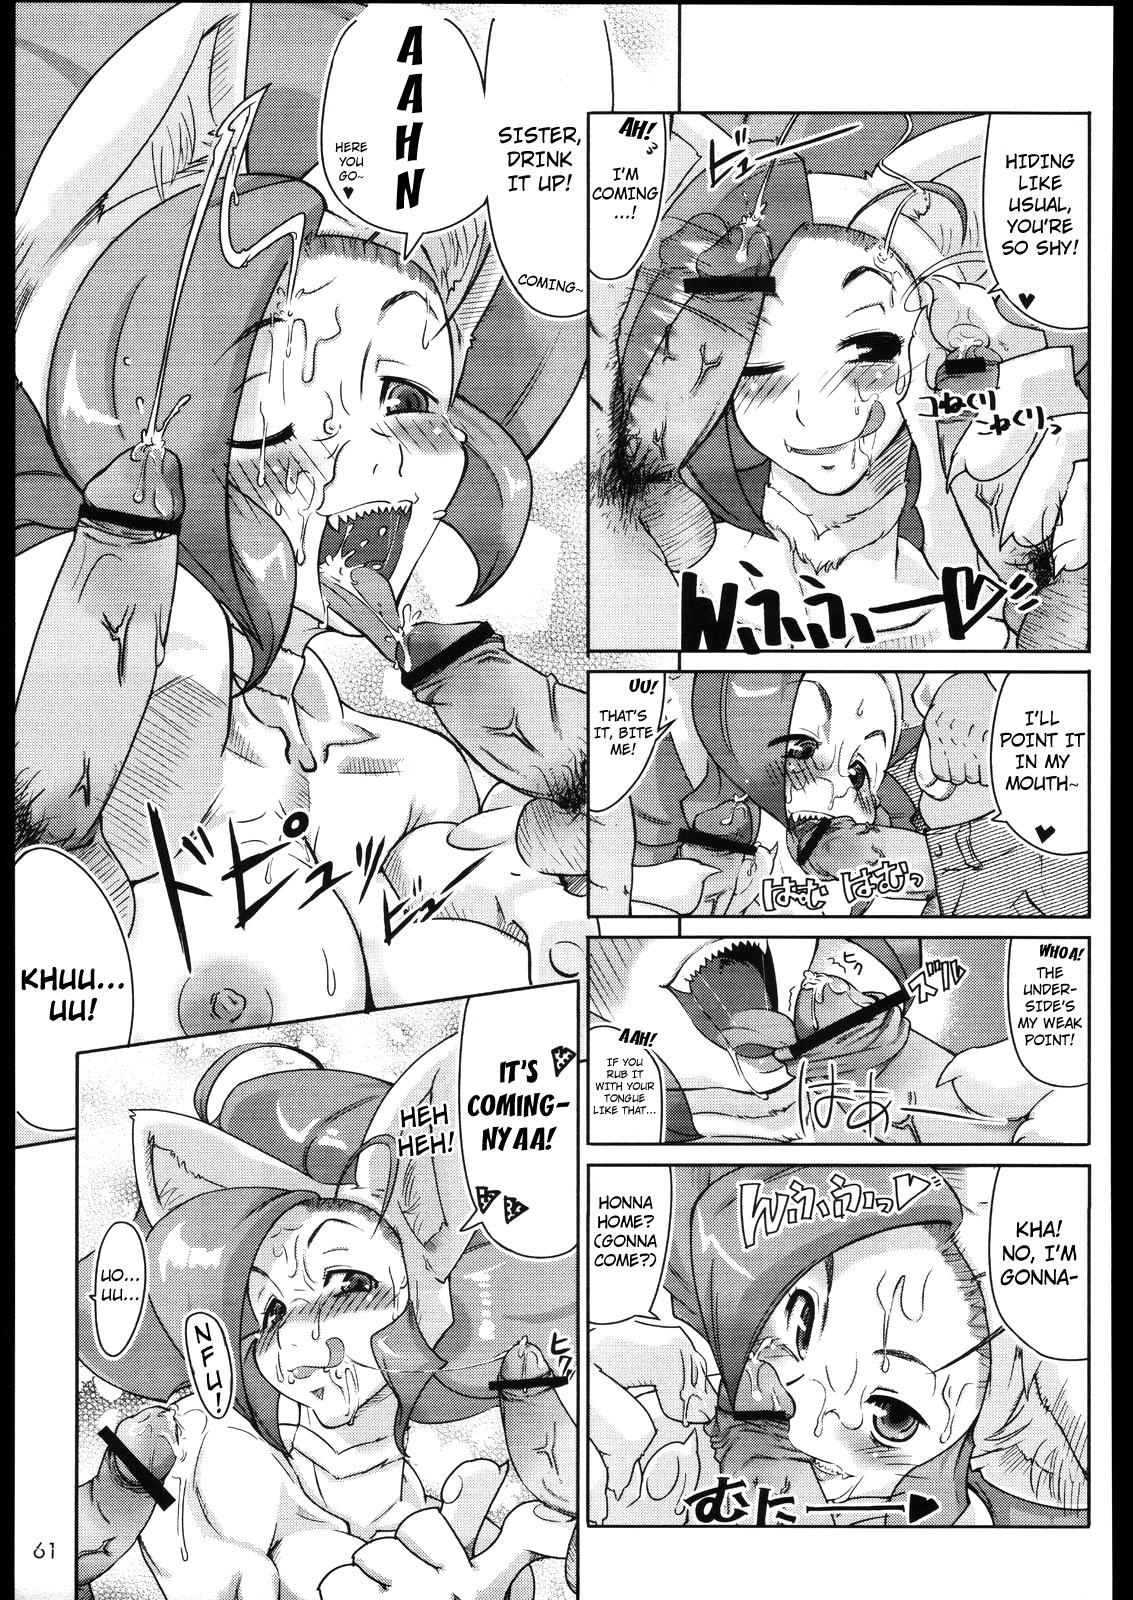 Asia Always Cheerful! - Darkstalkers Pay - Page 7